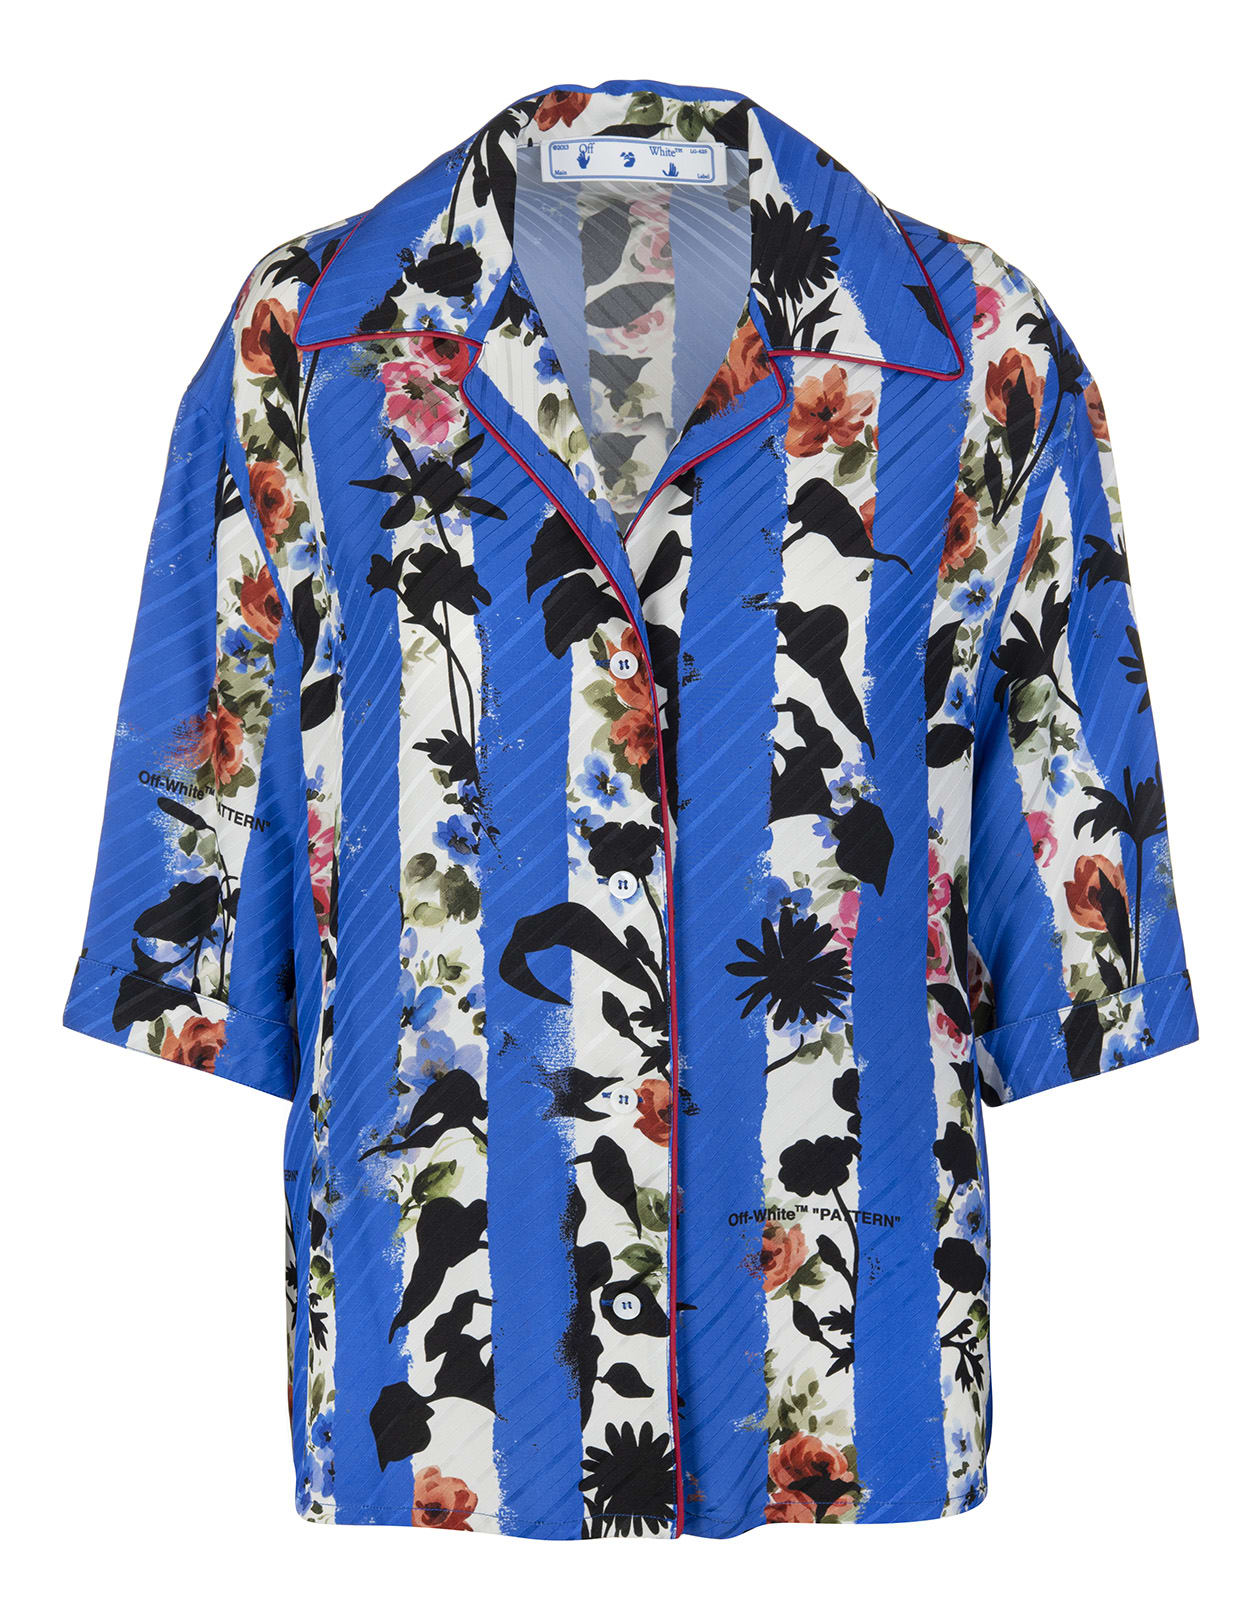 OFF-WHITE WOMAN BLUE BOWLING SHIRT WITH FLORAL STRIPES,OWGA071S21FAB002 0145